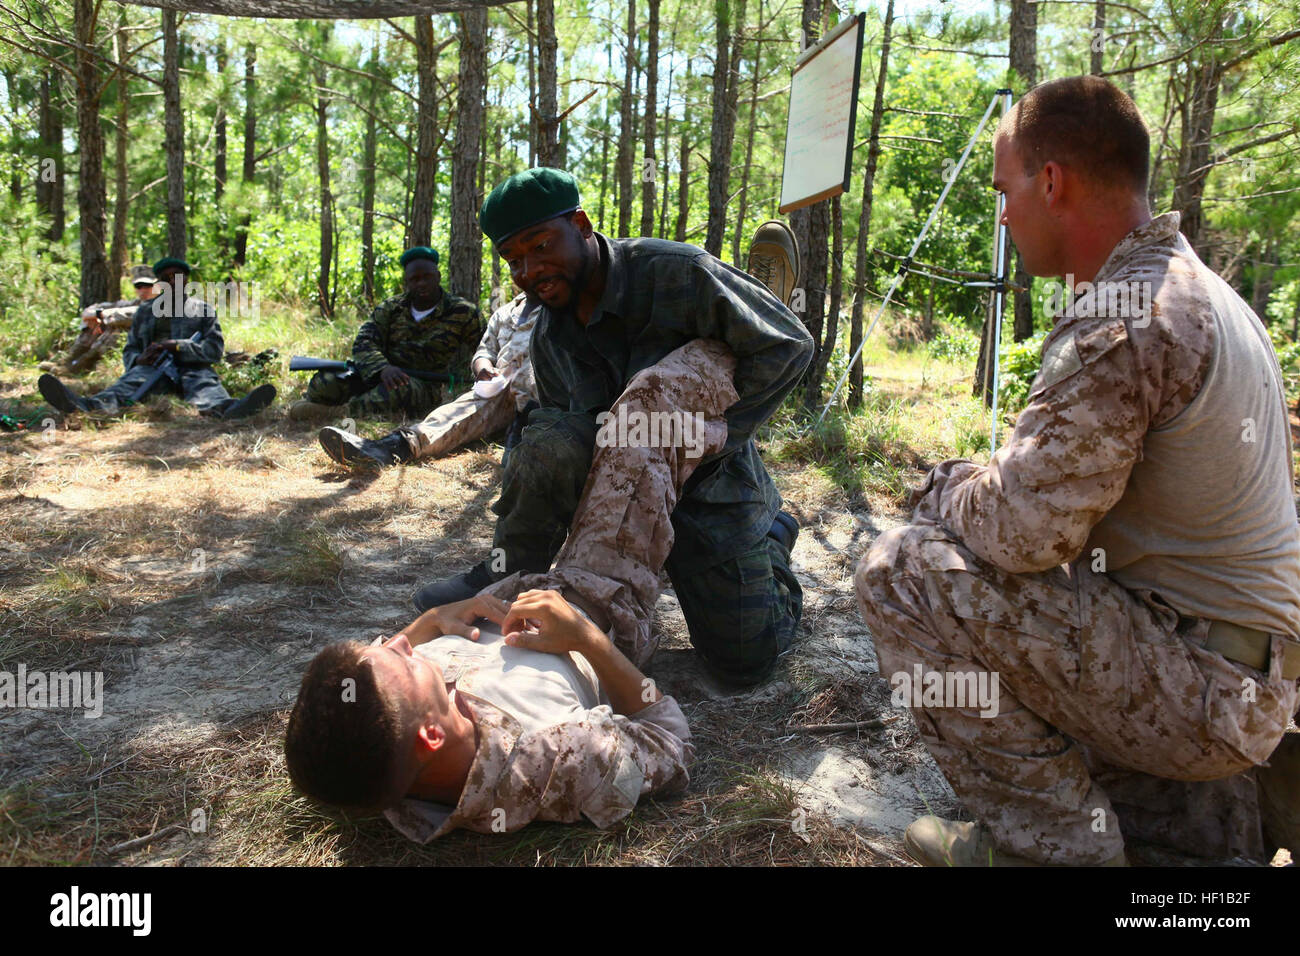 A role-player applies a leg-lock to Cpl. Richard Wehner, an automotive organizational mechanic and White Marsh, Md., native, with Special-Purpose Marine Air-Ground Task Force Africa while Lance Cpl. Matthew Doyne, a machine gunner and Williamstown, N.J., native watches during their Alternate Mission Rehearsal Exercise aboard Camp Lejeune, N.C., June 14, 2013. The Task Force conducted pre-deployment training for their upcoming deployment this summer to Naval Air Station Sigonella, Italy, where they will support U.S. Marine Corps Forces Africa. (U.S. Marine Corps photo by Lance Cpl. Ryan Joyner/ Stock Photo